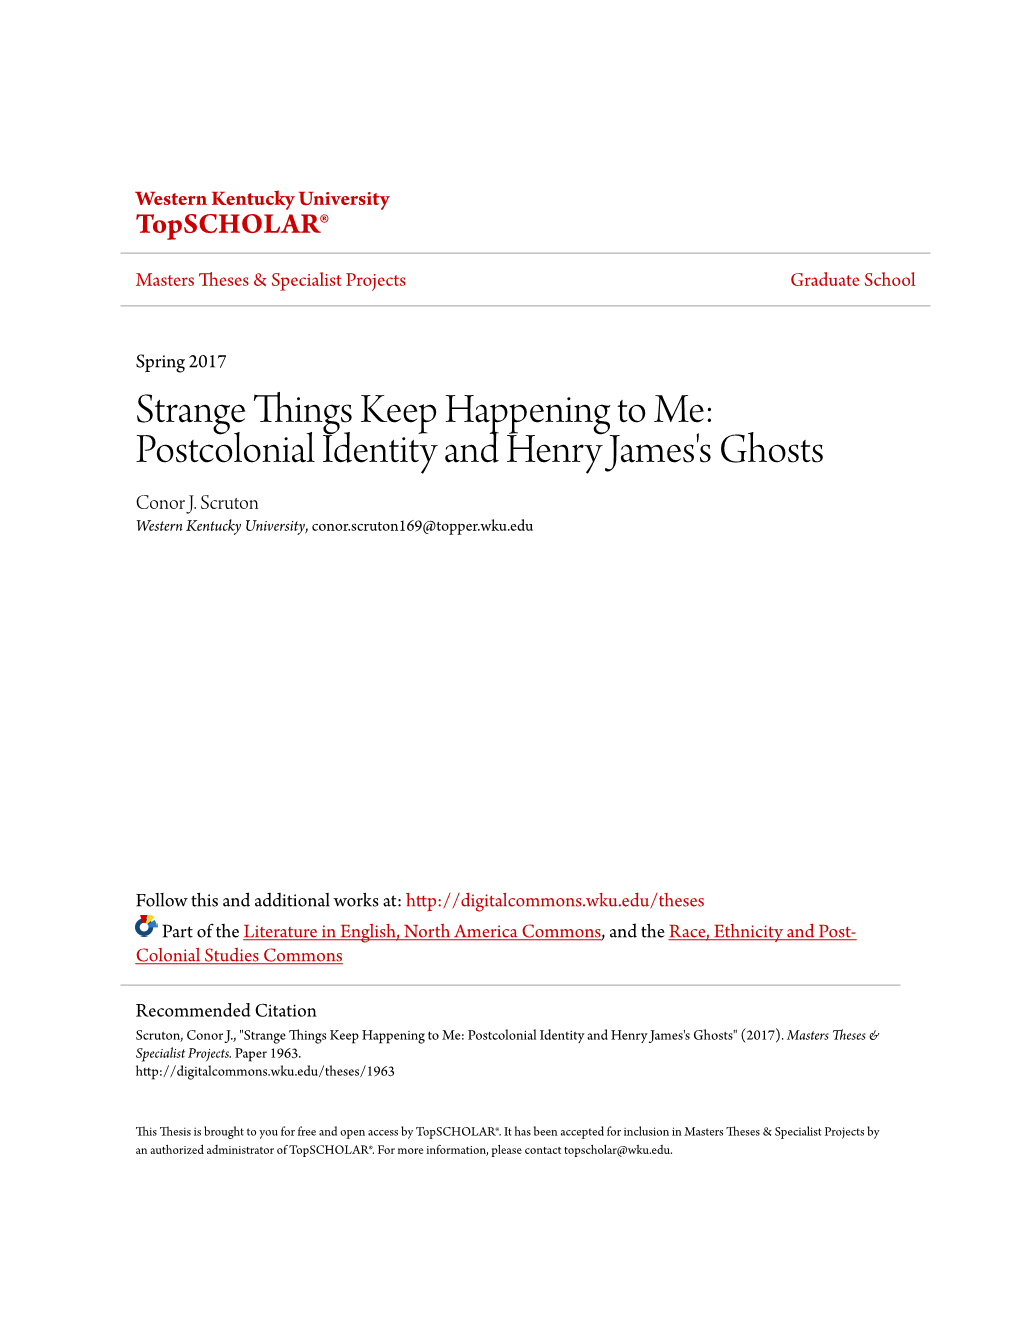 Postcolonial Identity and Henry James's Ghosts Conor J